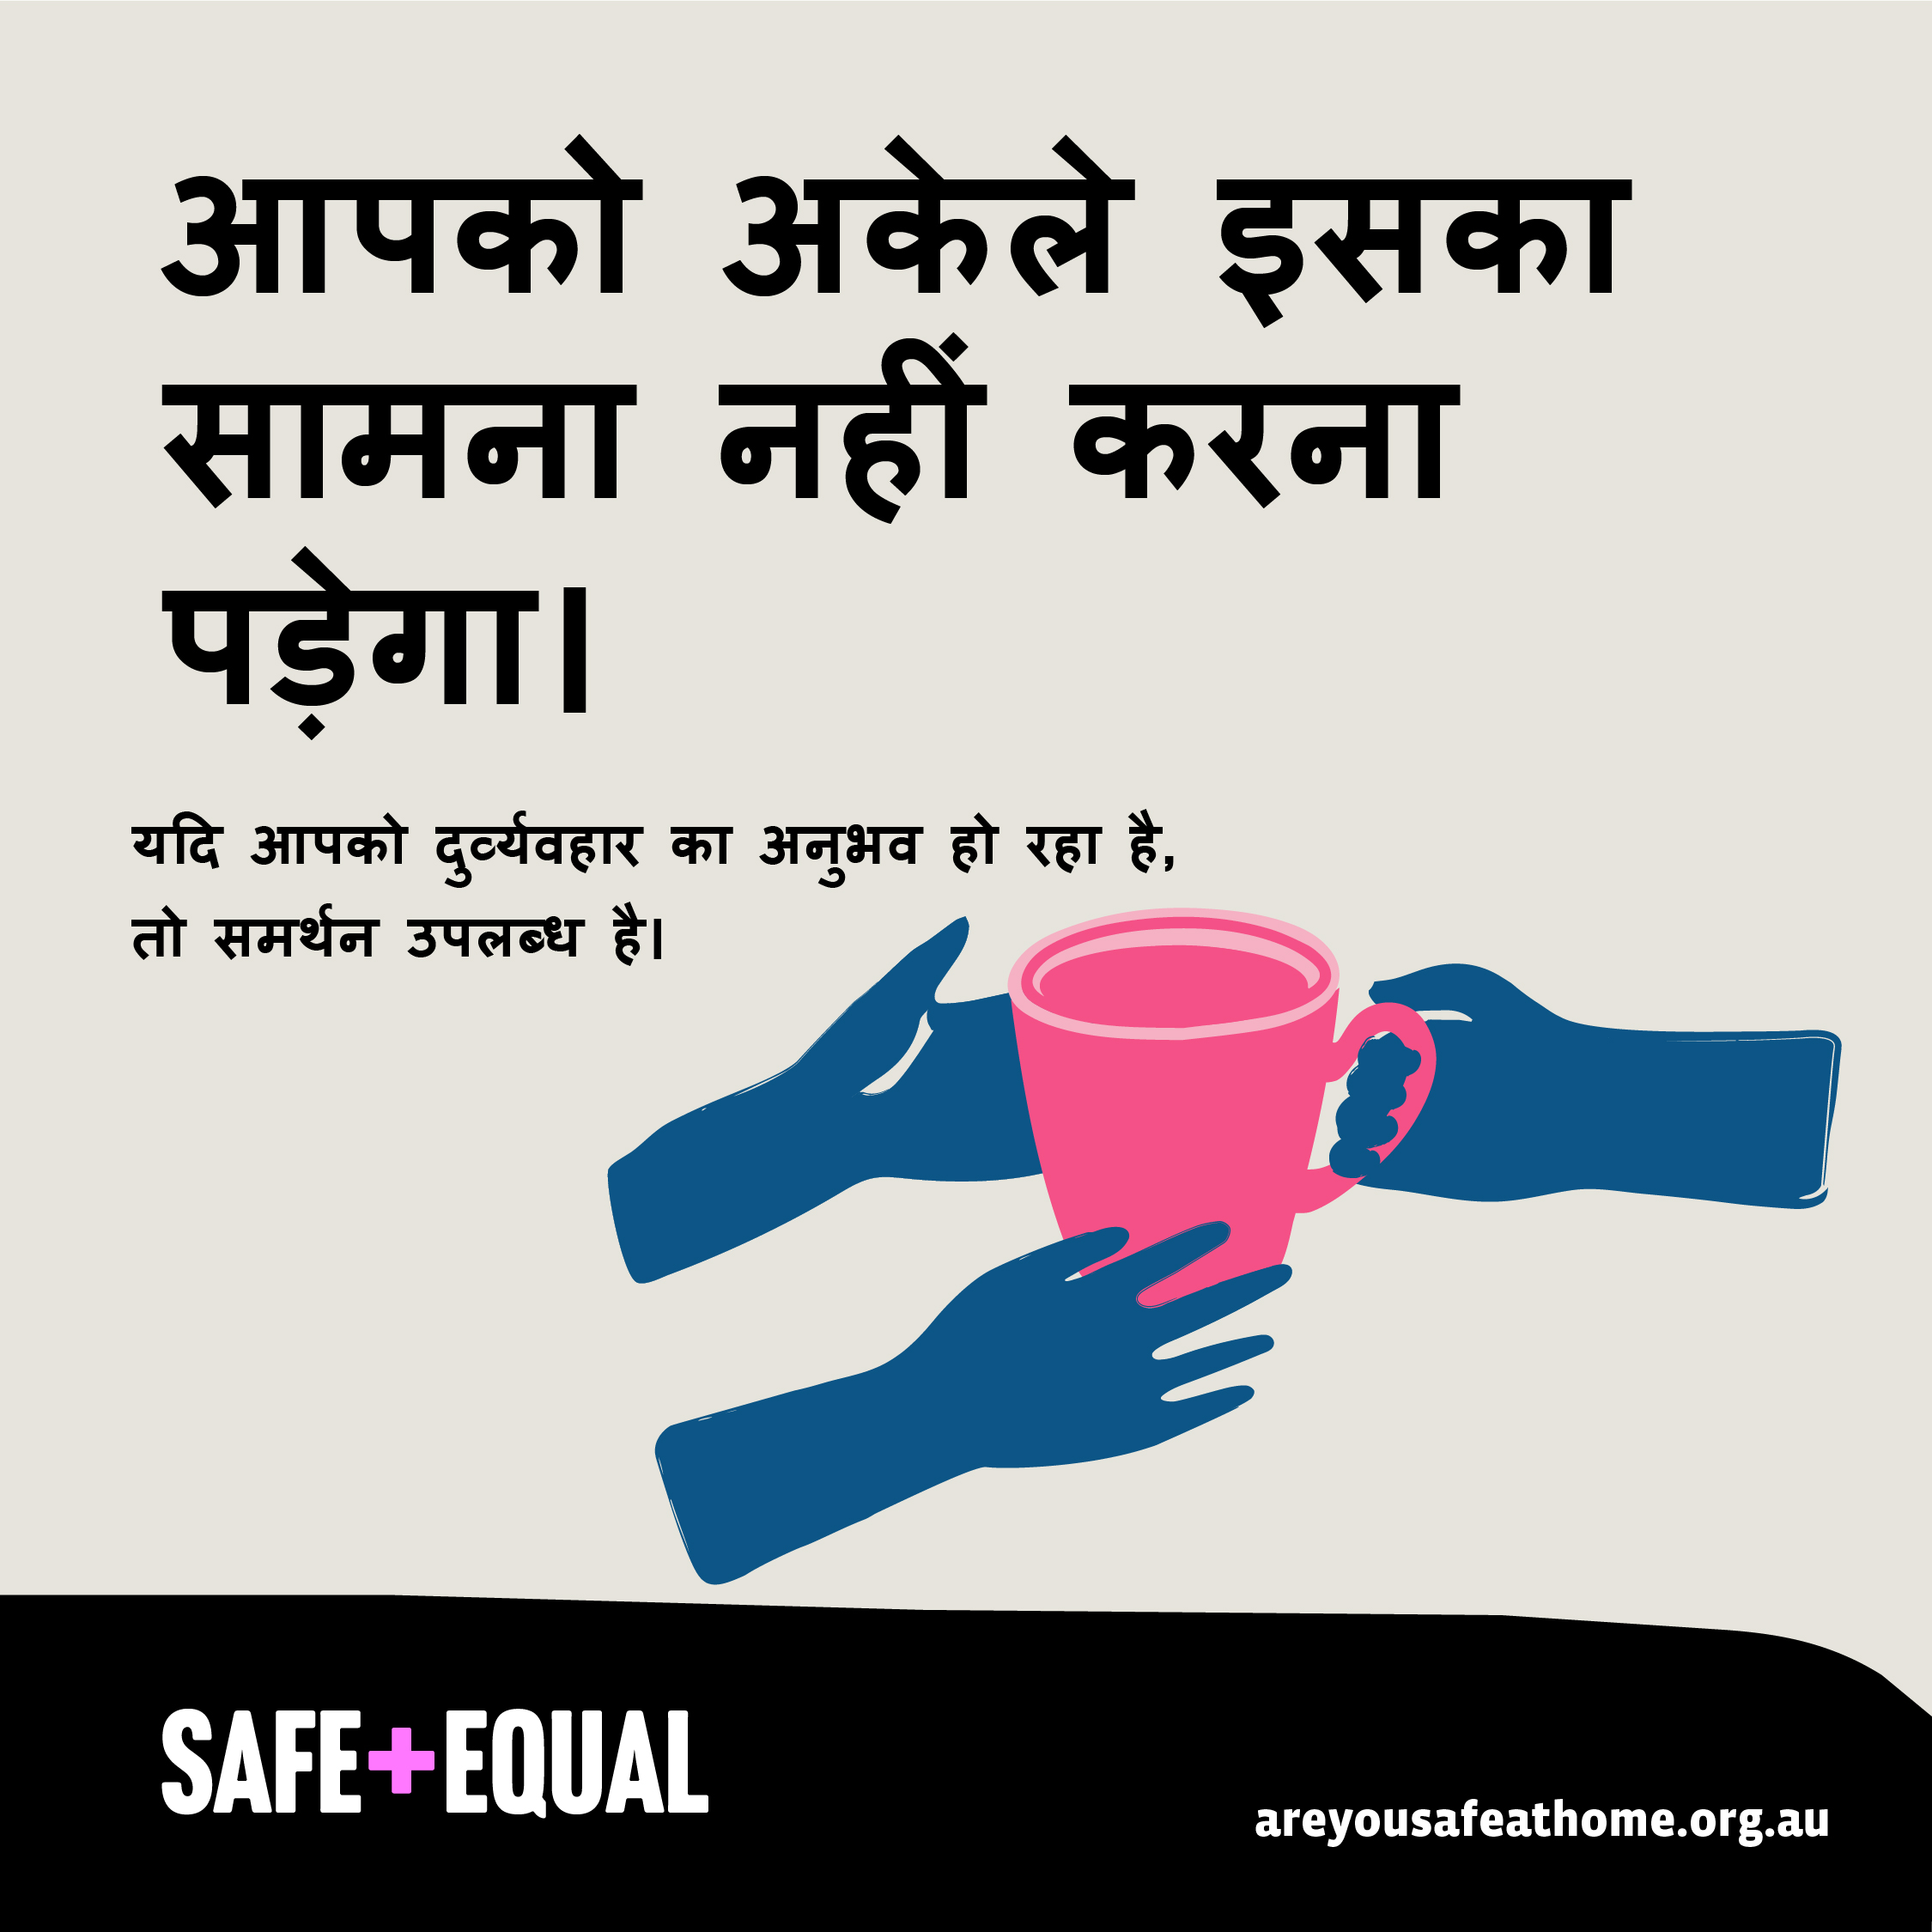 Social media tile for Are you safe at home translated into Hindi